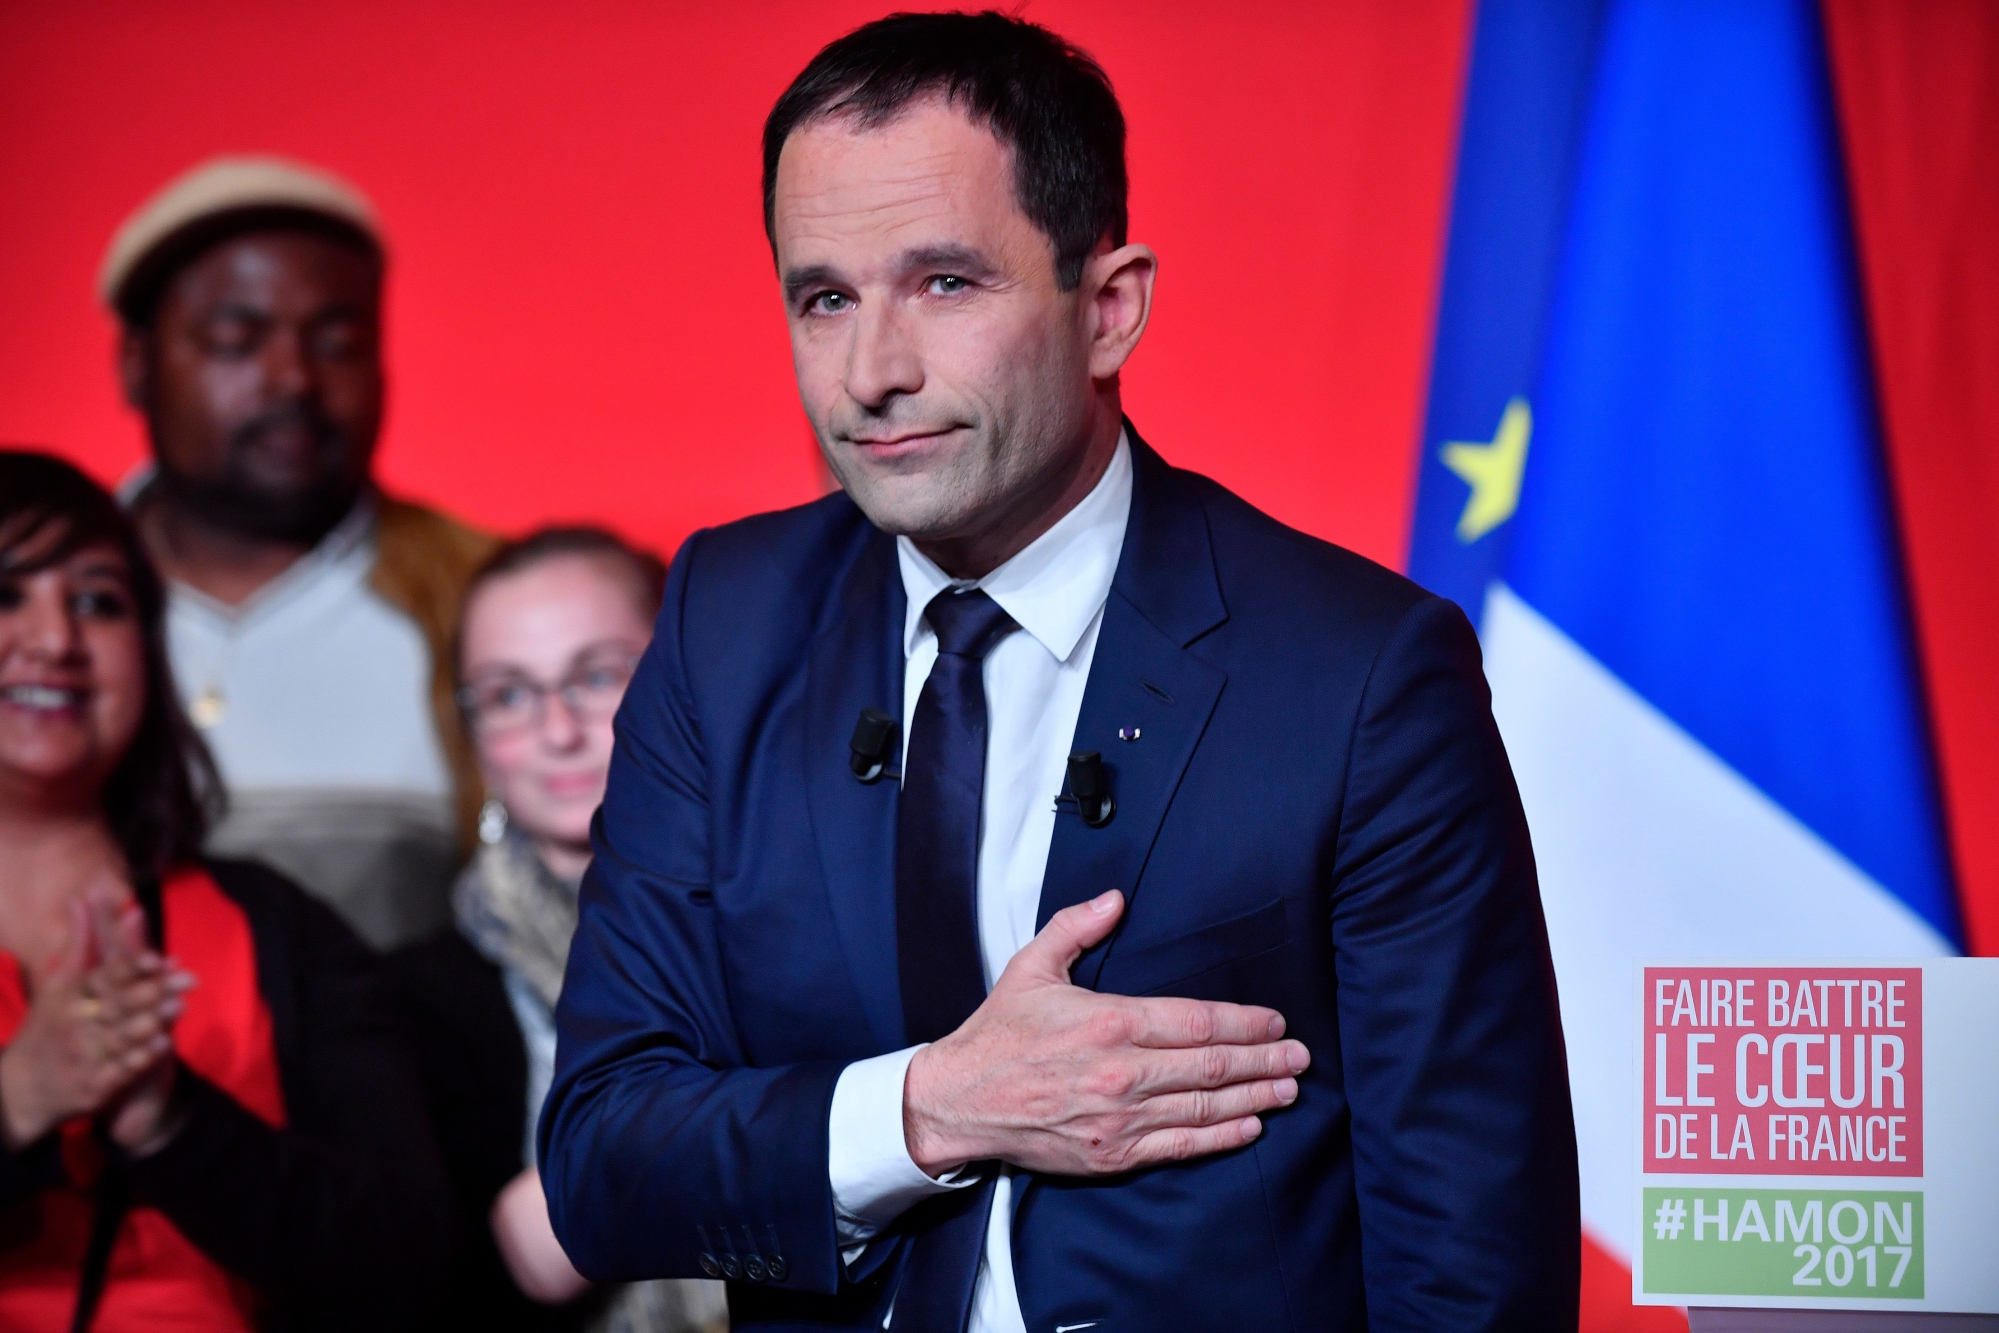 epaselect epa05924295 French presidential election candidate for the left-wing French Socialist (PS) party, Benoit Hamon delivers a speech after being defeated in the first round of the French presidential elections in Paris, France, 23 April 2017. France will hold the second round of the presidential elections on 07 May 2017.  EPA/JULIEN DE ROSA epaselect FRANCE PRESIDENTIAL ELECTIONS